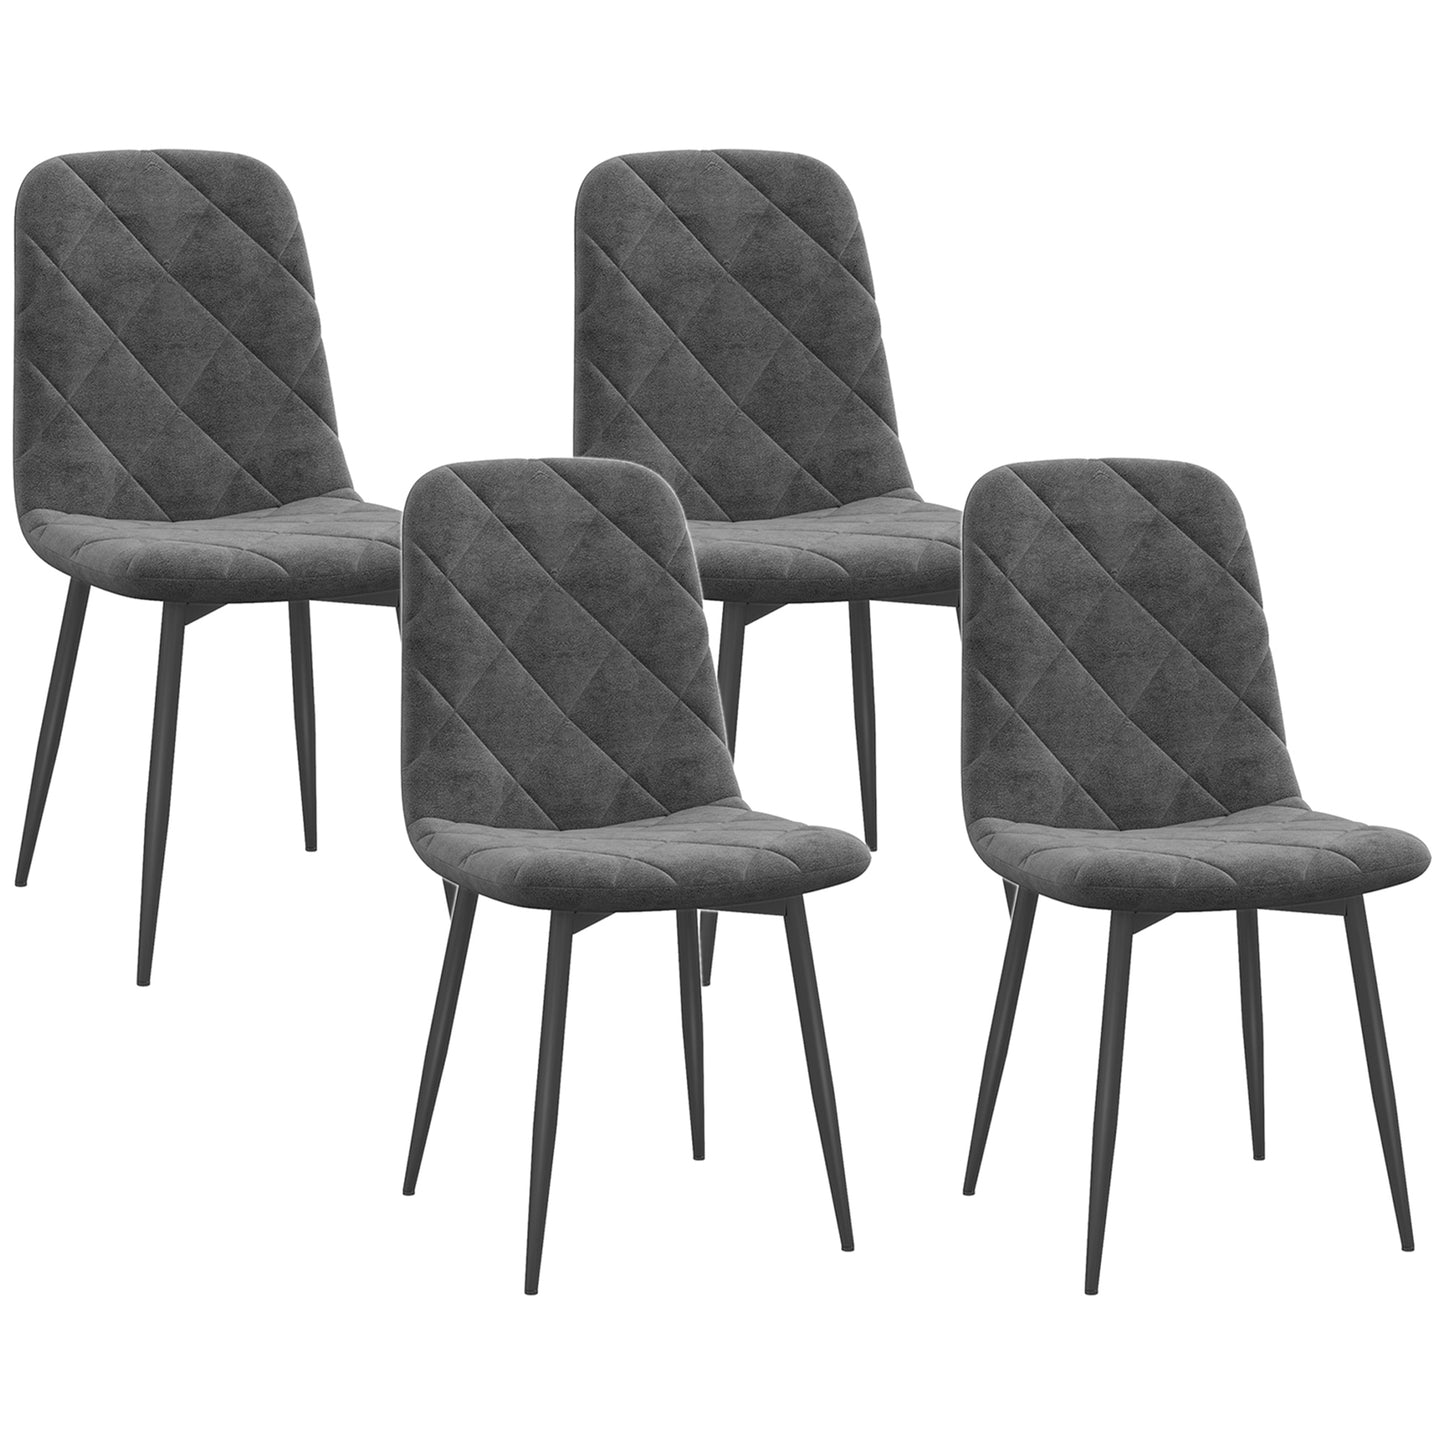 Dining Chairs Set of 4, Upholstered with Steel Legs, in Grey